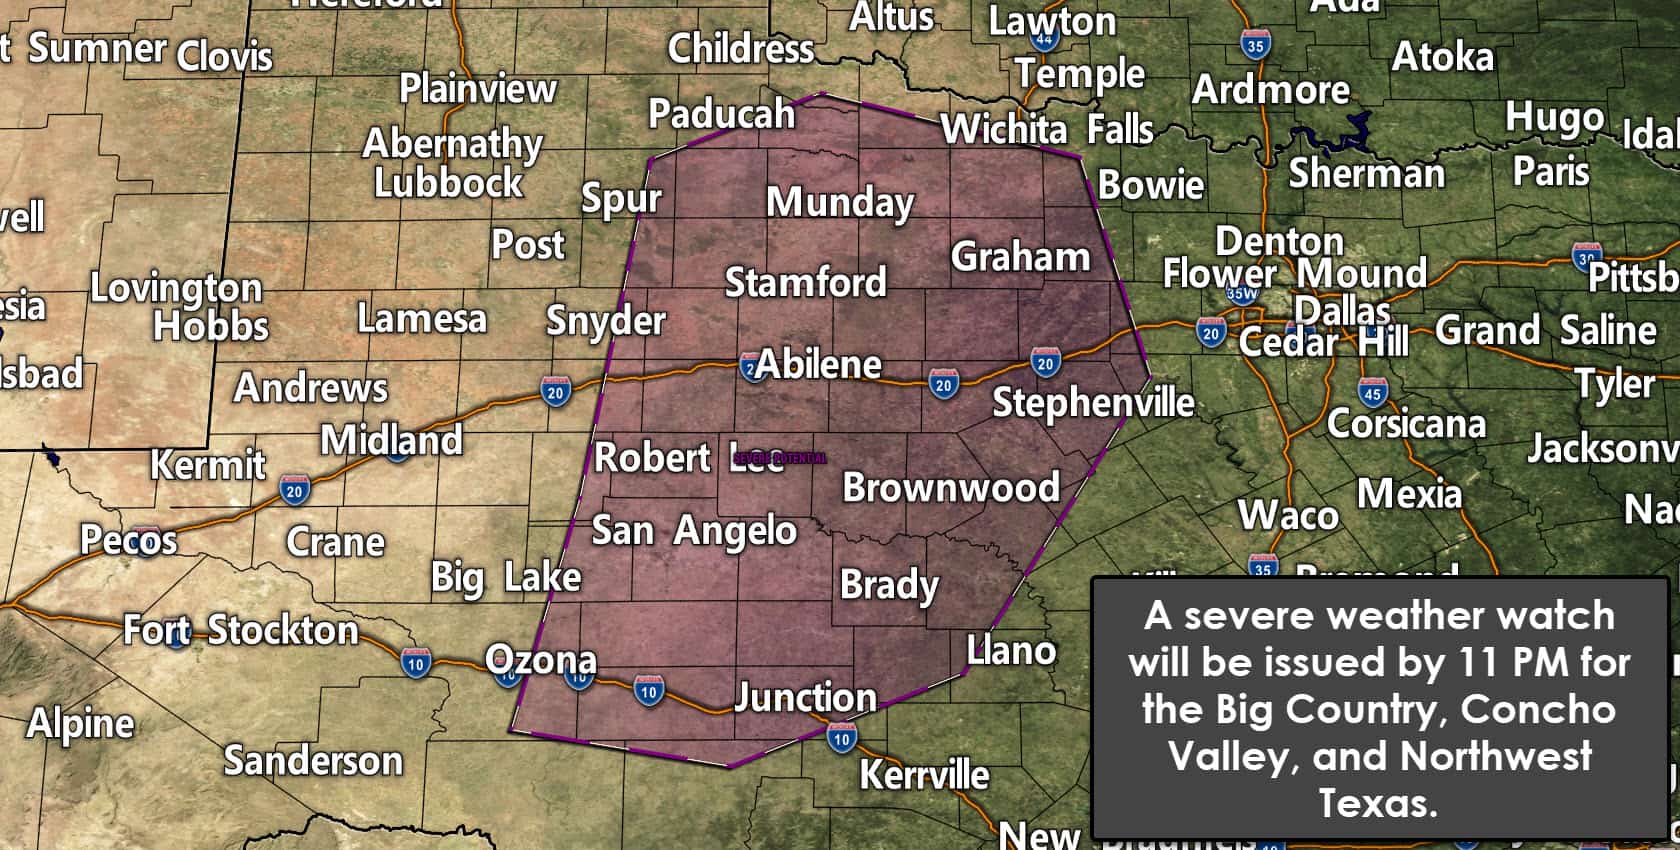 Severe Weather Watch likely to be issued soon for Big Country & Concho Valley